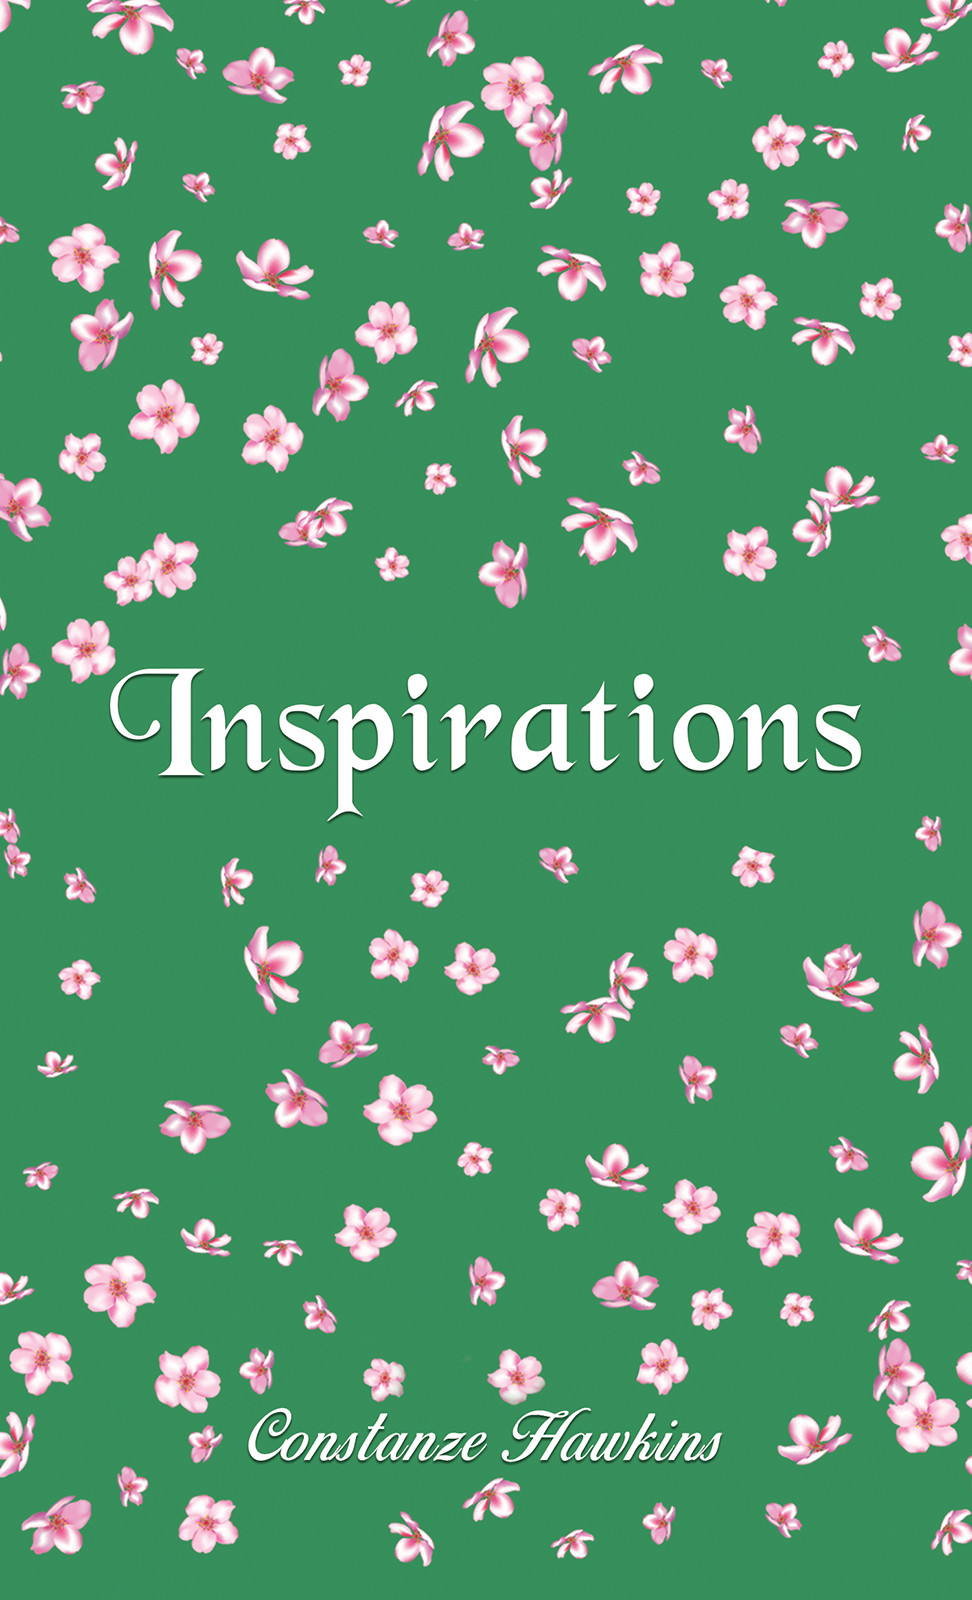 Inspirations-bookcover